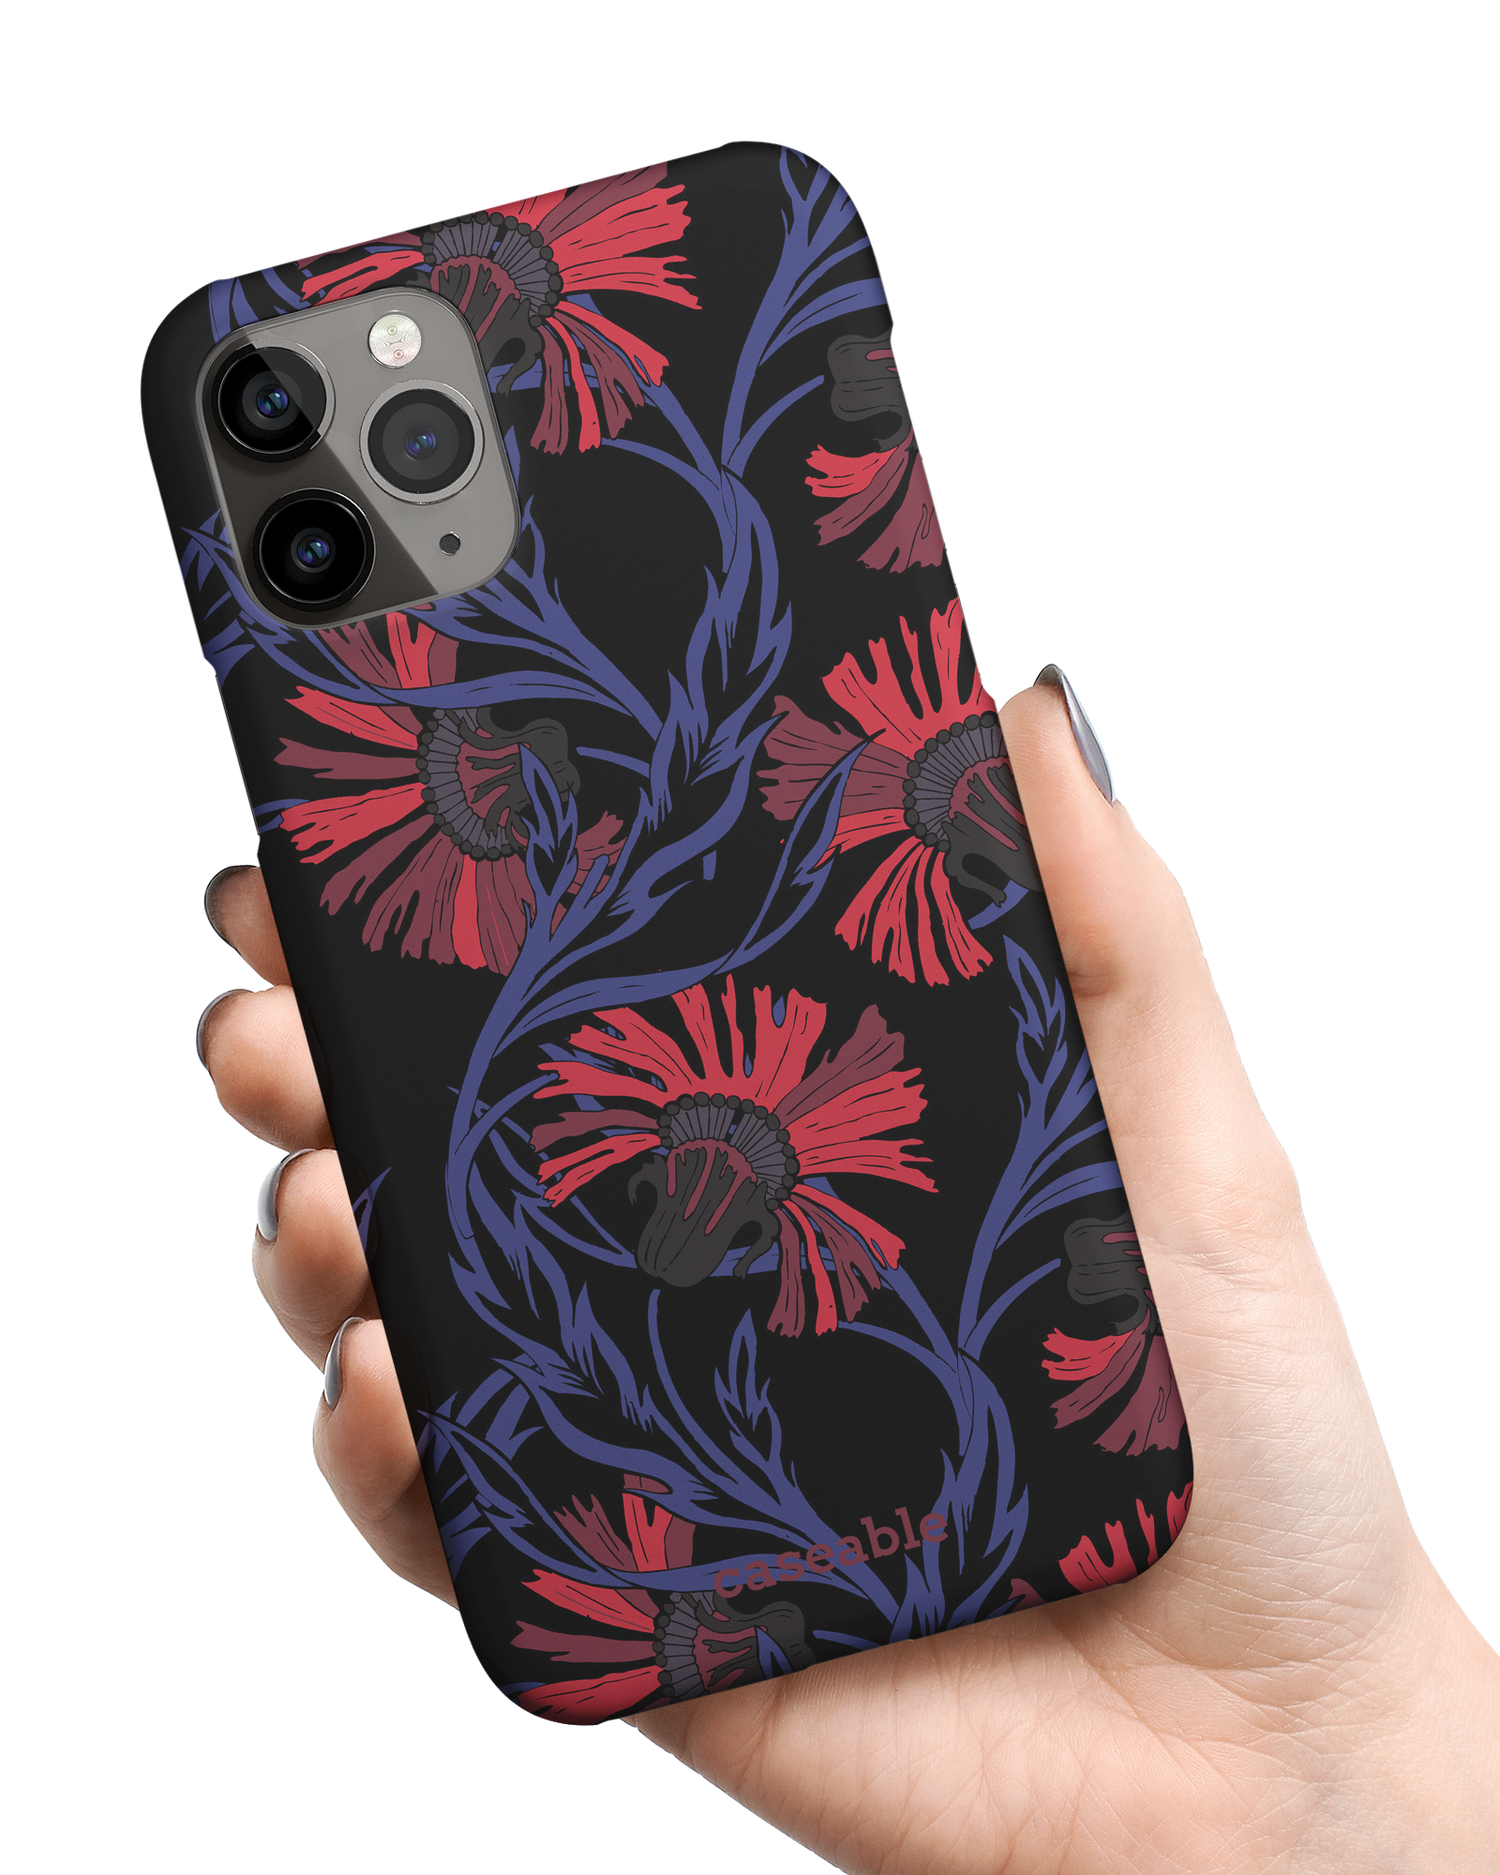 Midnight Floral Hard Shell Phone Case Apple iPhone 11 Pro Max held in hand